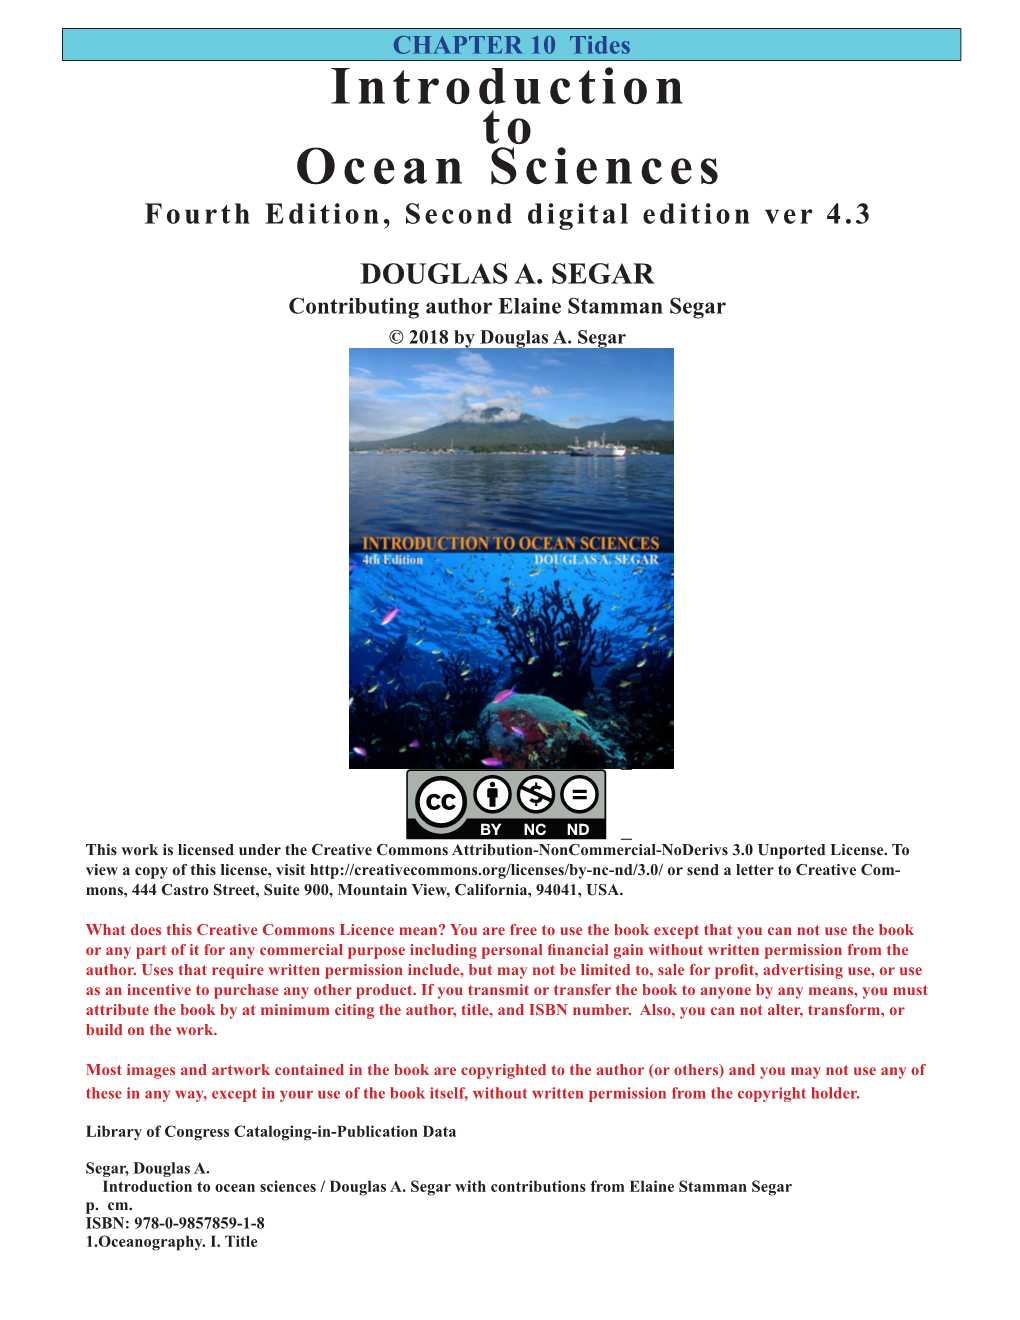 Introduction to Ocean Sciences, 4Th Edition, Chapter 10